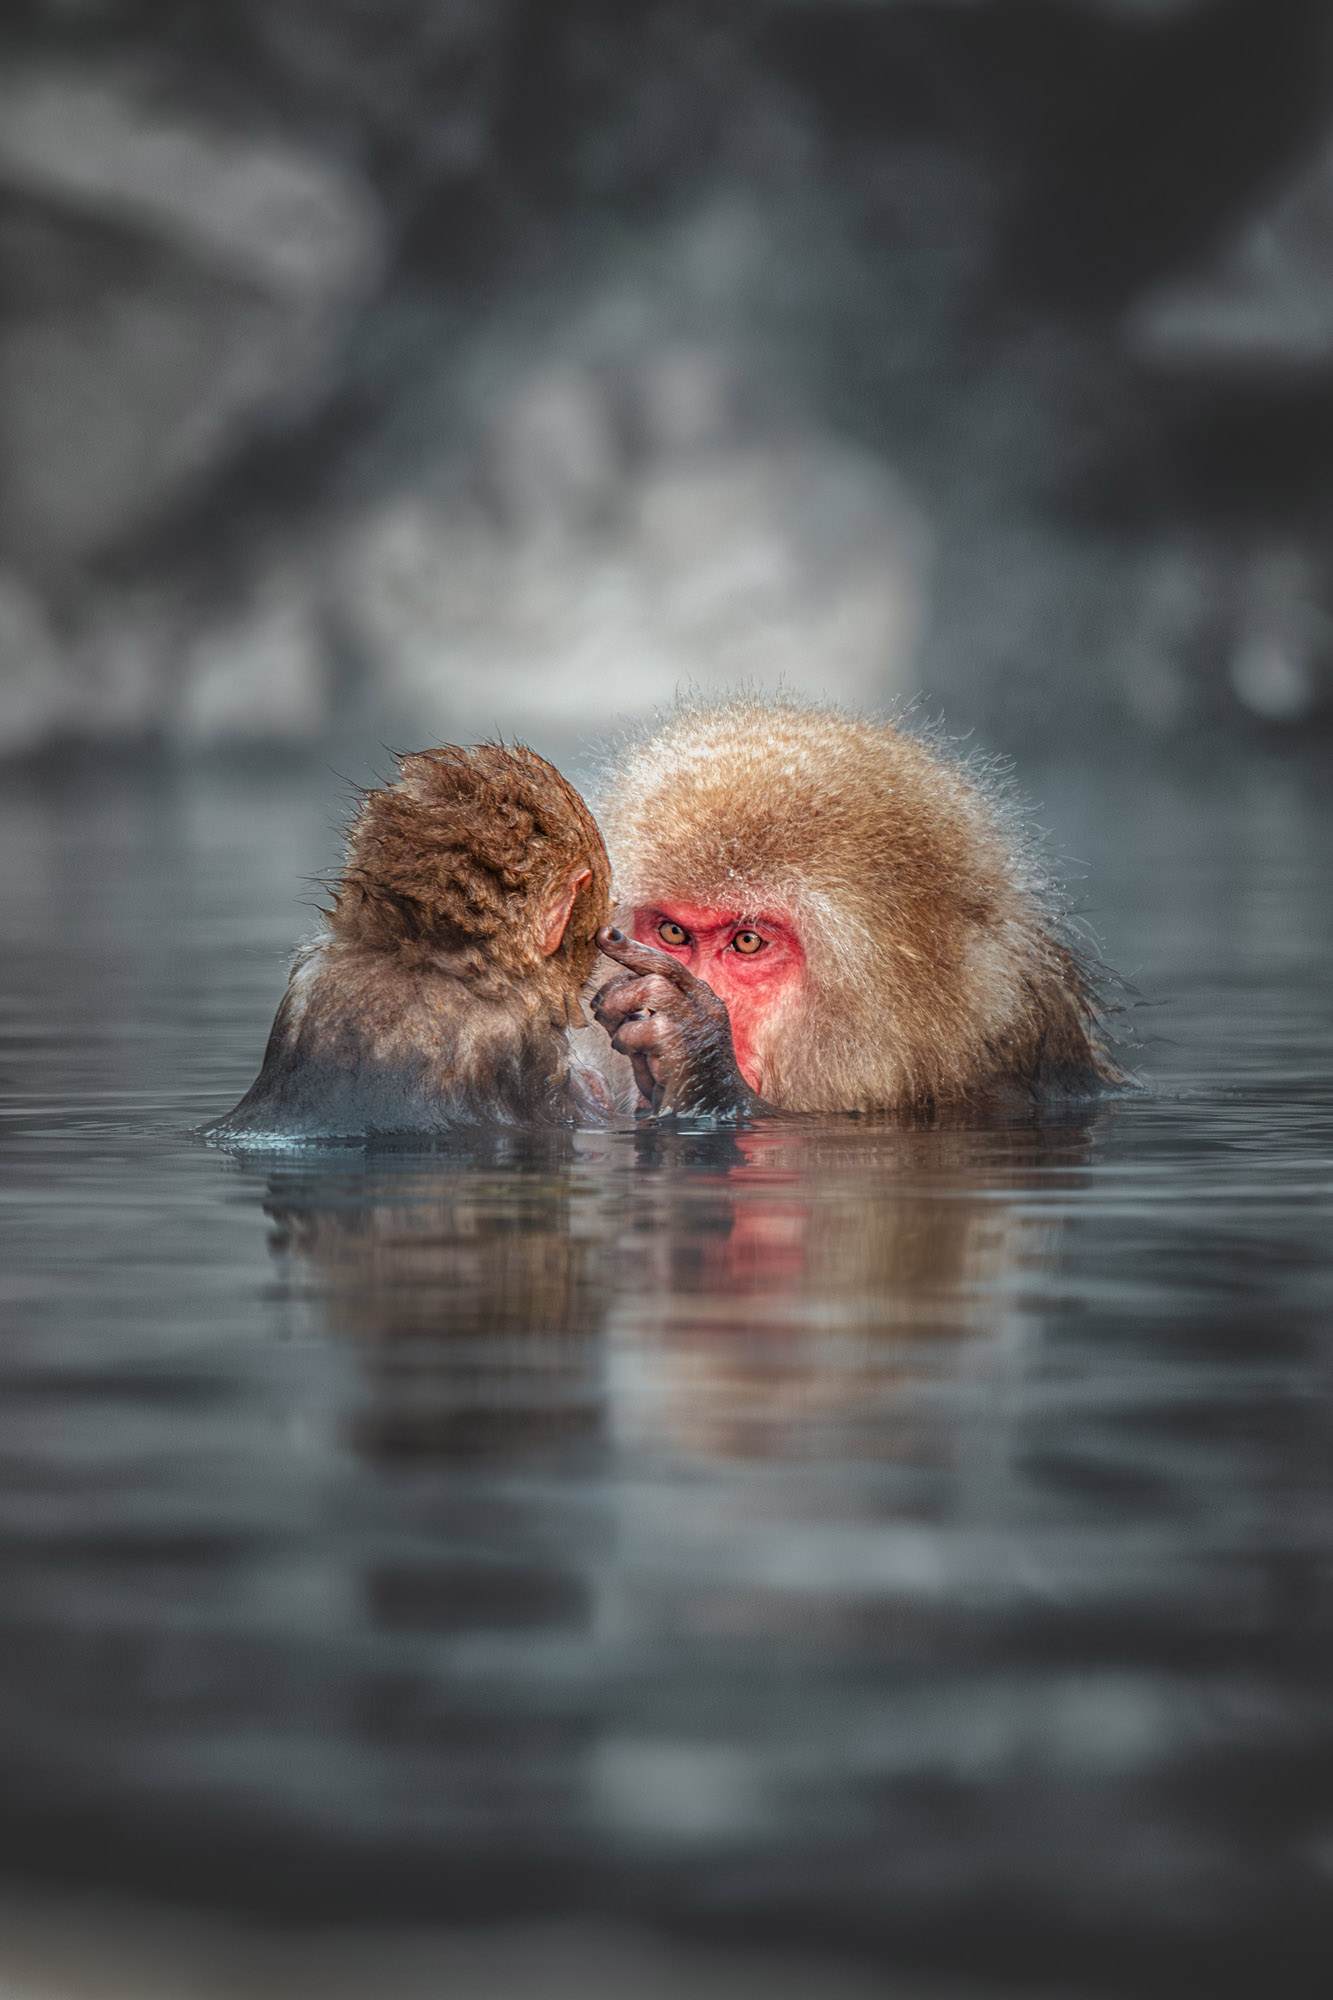 A red-faced monkey poking the face of its child